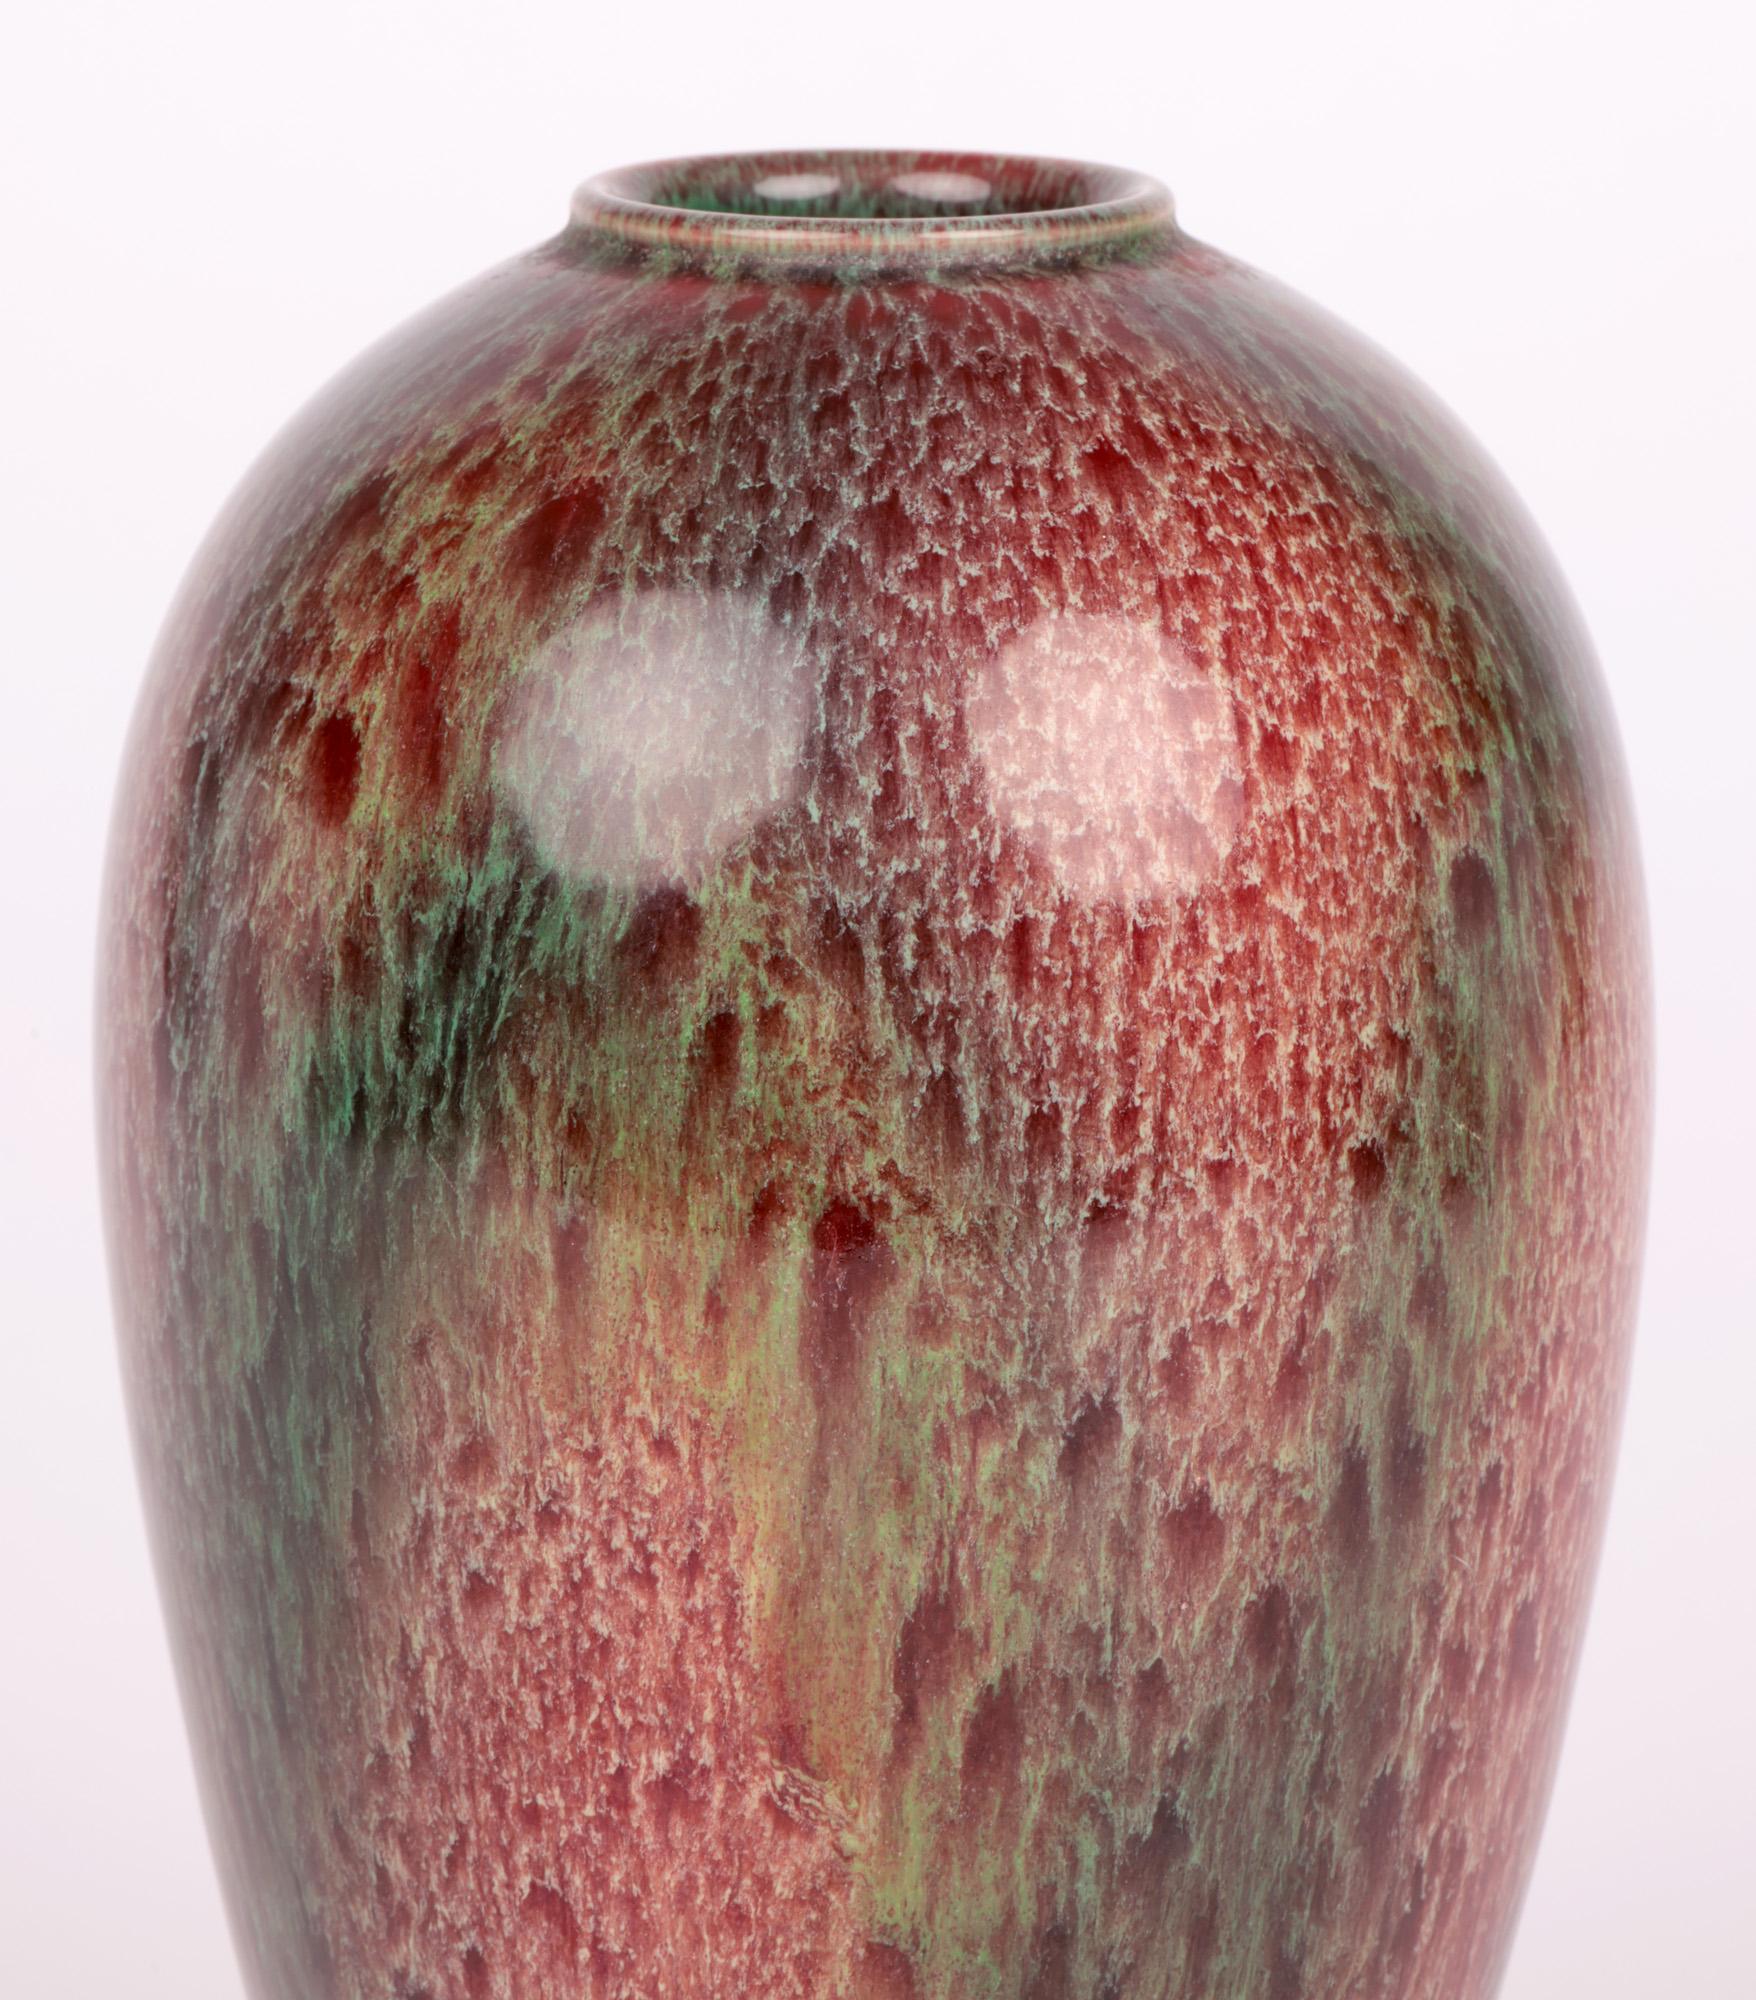 A rare Bretby Art Nouveau high fired ‘flambe’ glazed art pottery vase by Henry Tooth & Co and dating from 1900-1910. This exquisite simple shaped bulbous vase stands on a narrow round foot and is of tall shape widening with a narrowing shoulder and